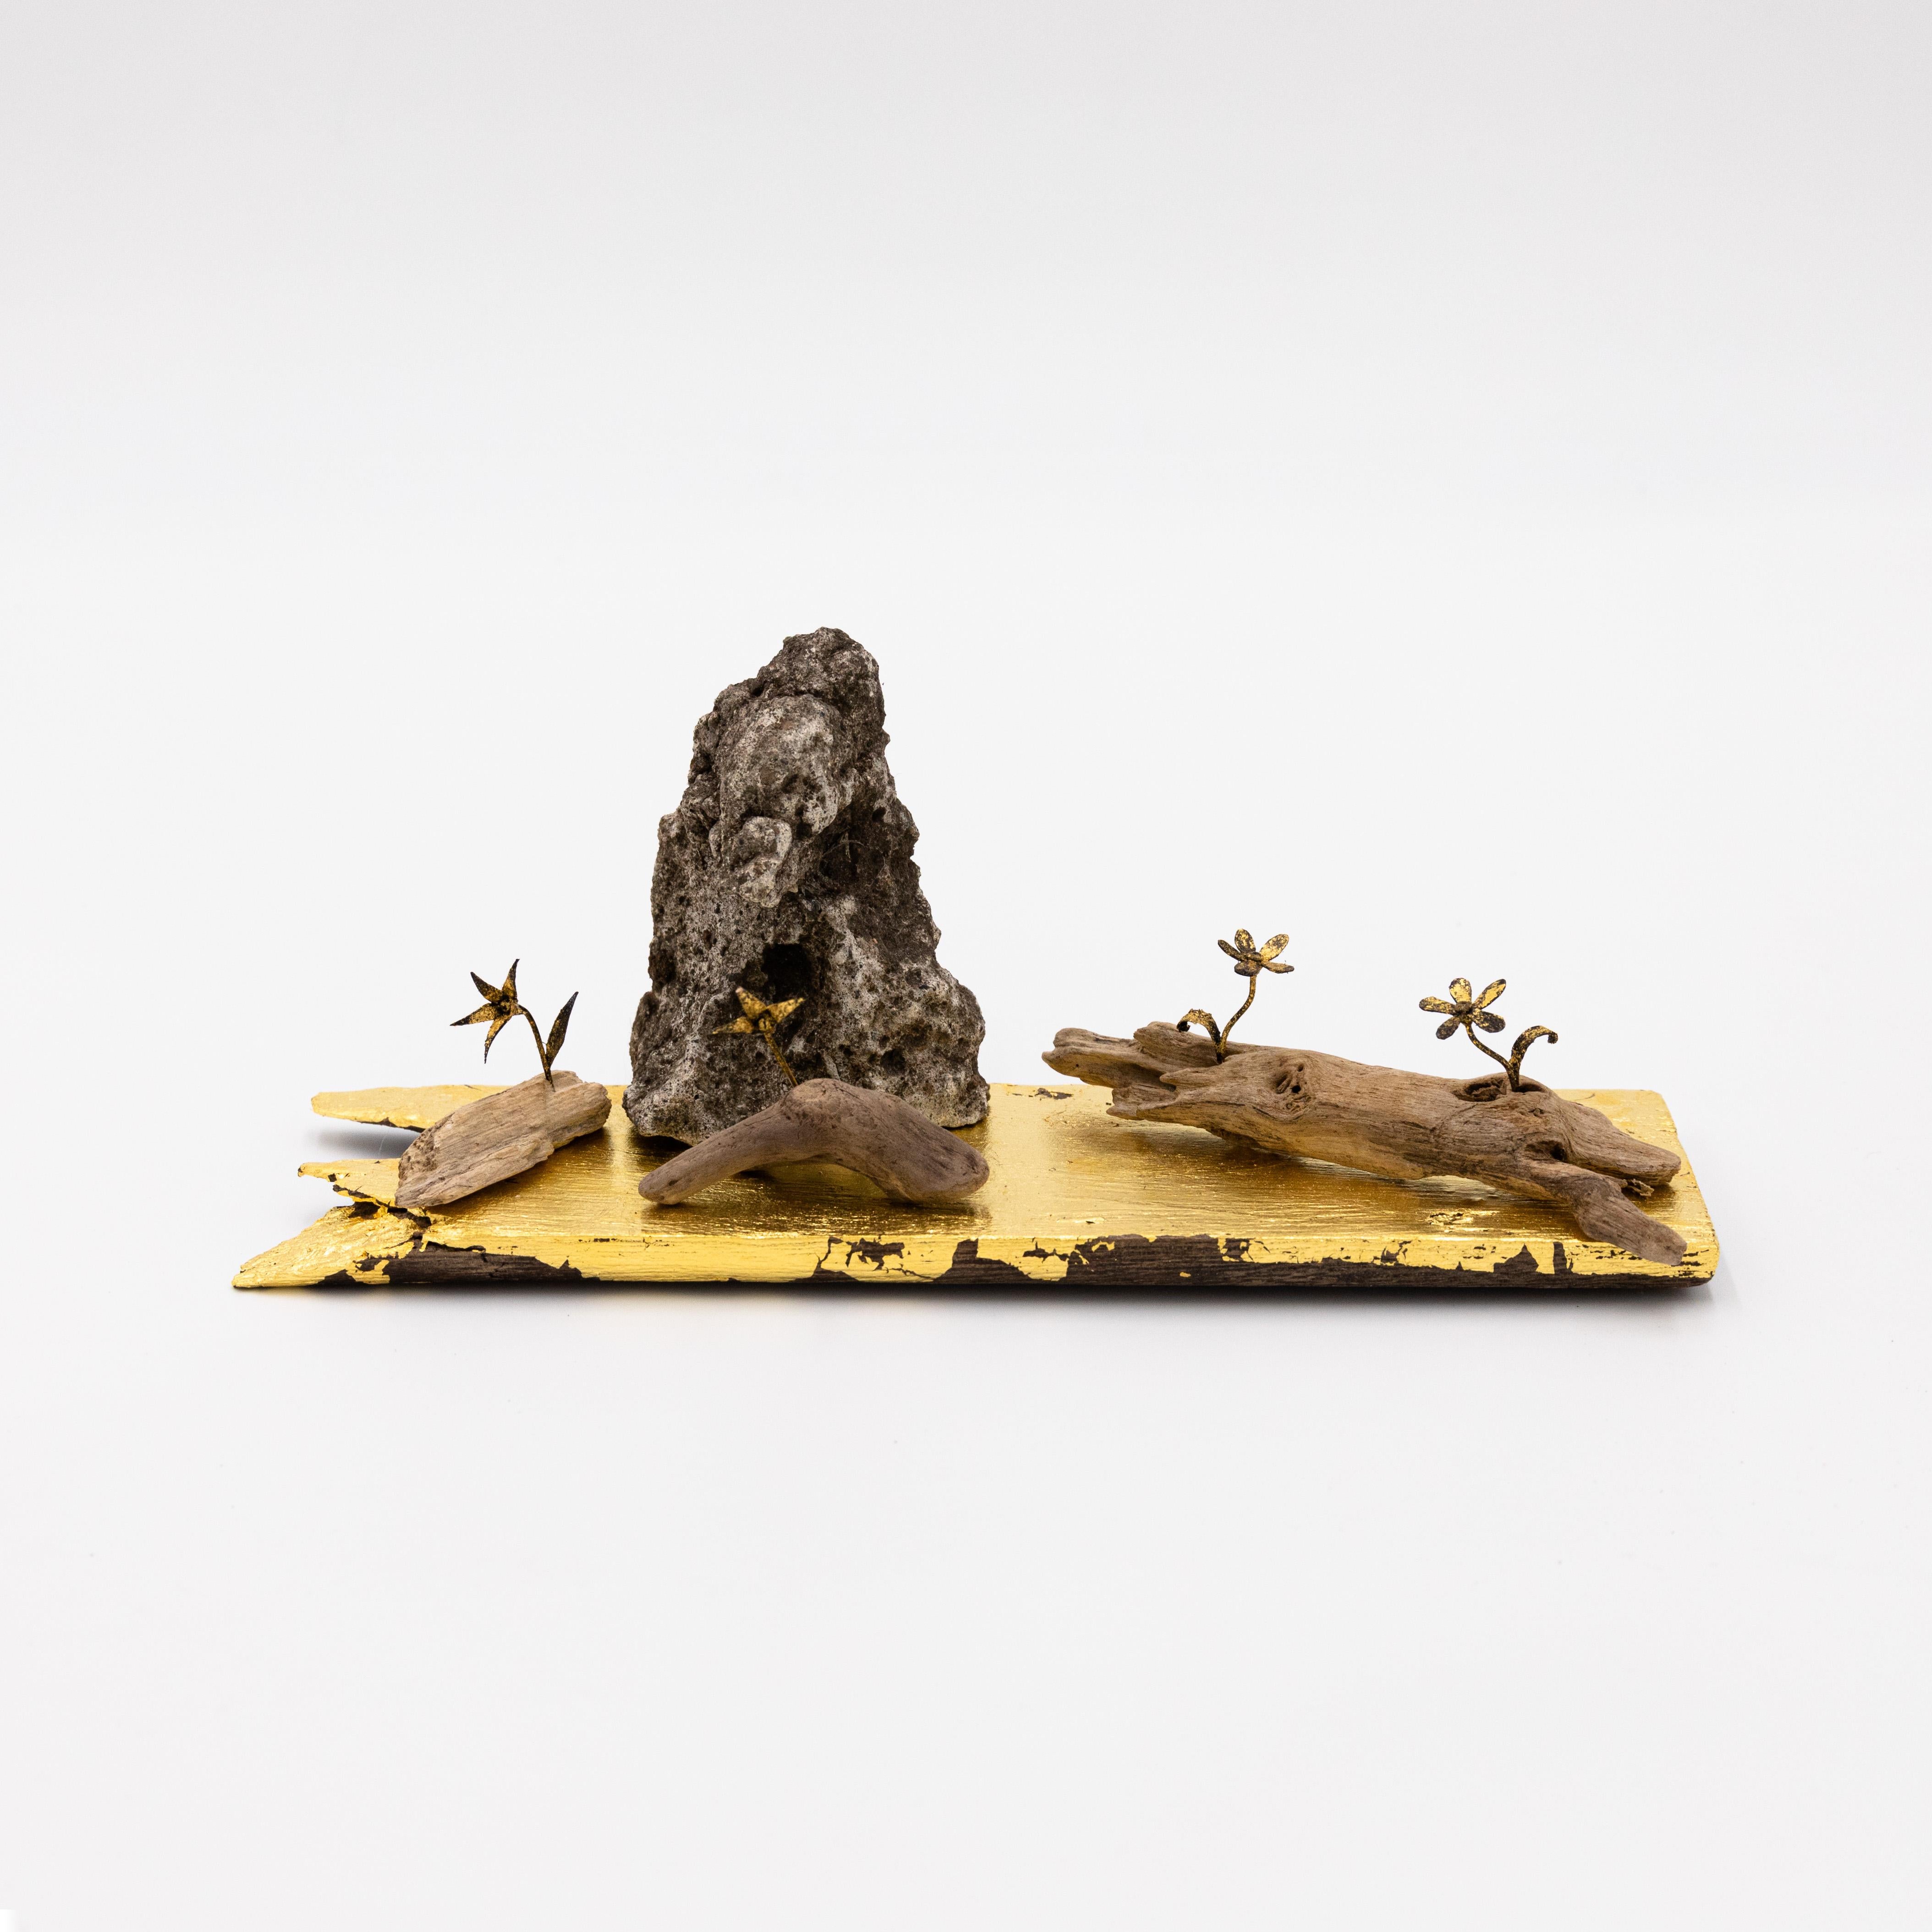 Gold leaf, concrete, wood, copper wire
W220 × D65 × H40 mm + W60 × D35 × H75 mm (concrete)

This collaborative work, which began with a common interest in Buddhism, explored the idea of expressing the sacred within everyday life.

As artist and Zen